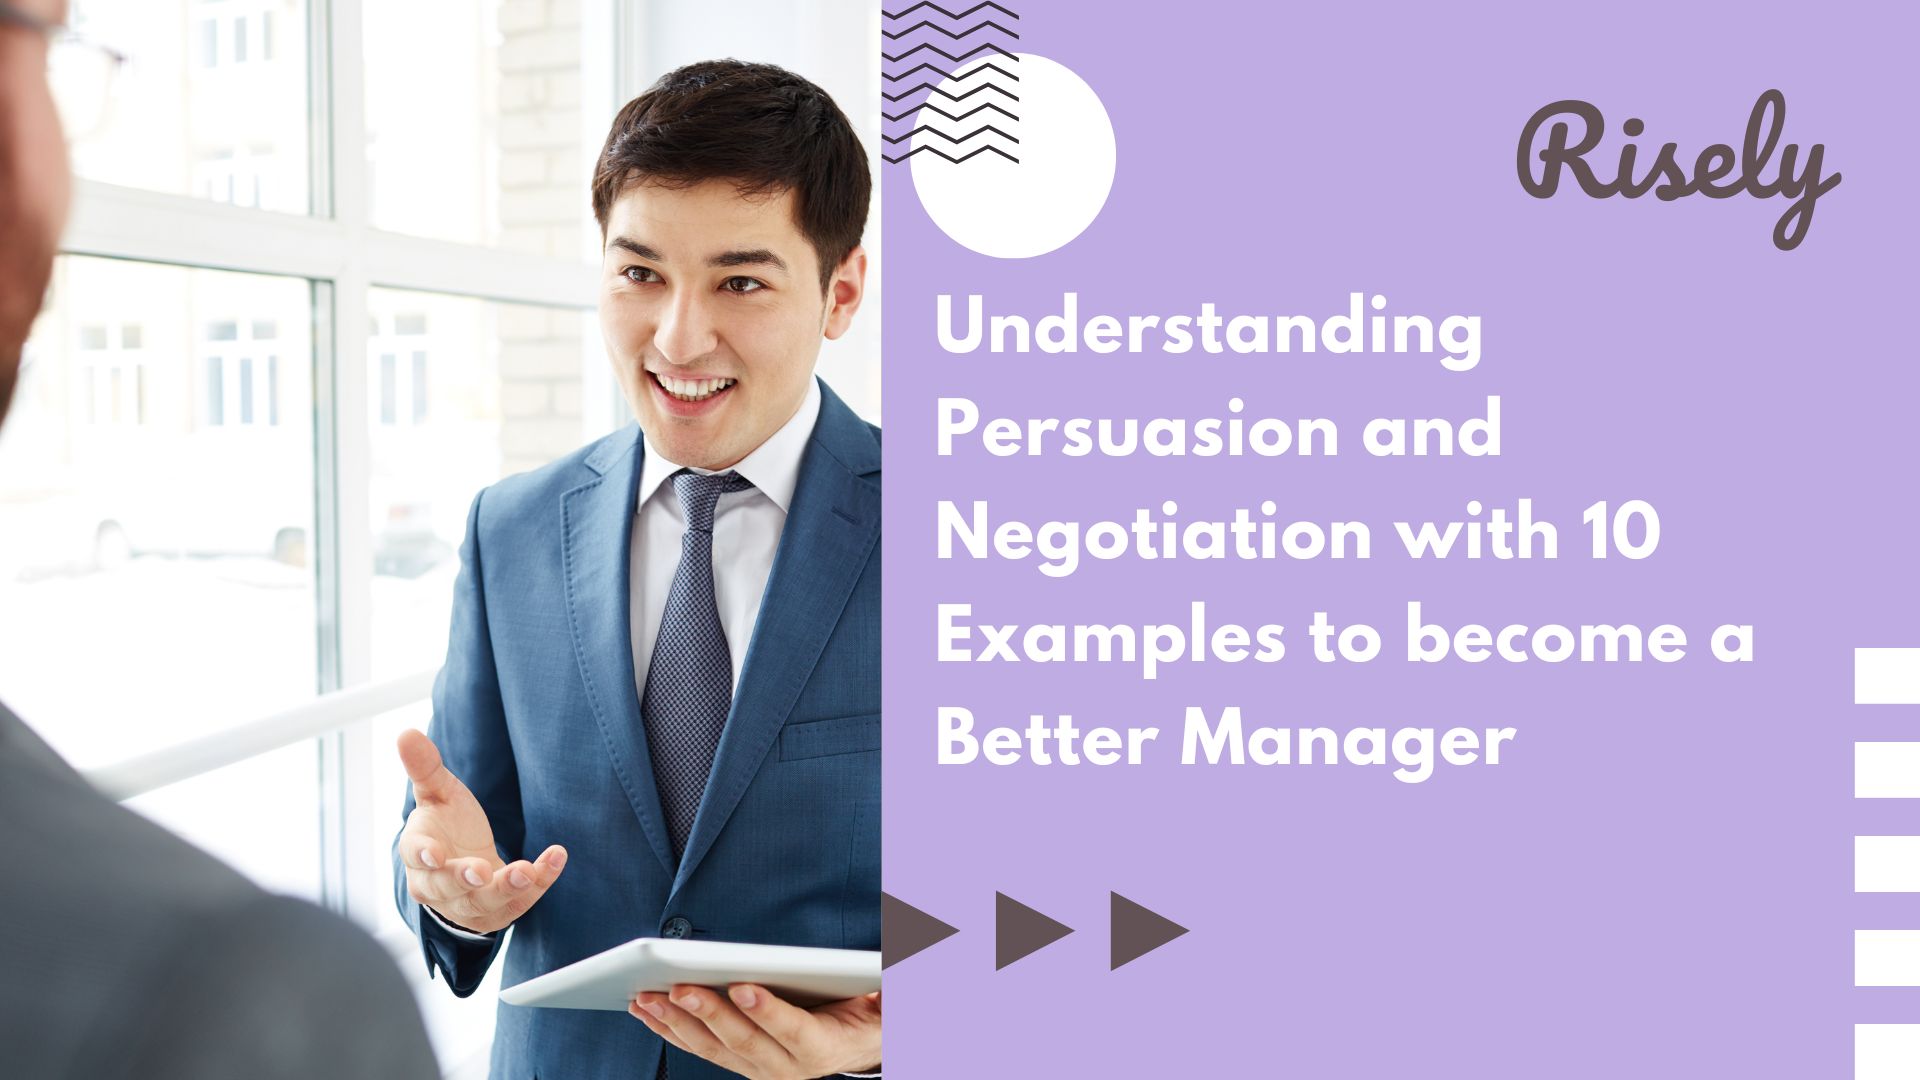 Understanding Persuasion and Negotiation with 10 Examples to become a Better Manager